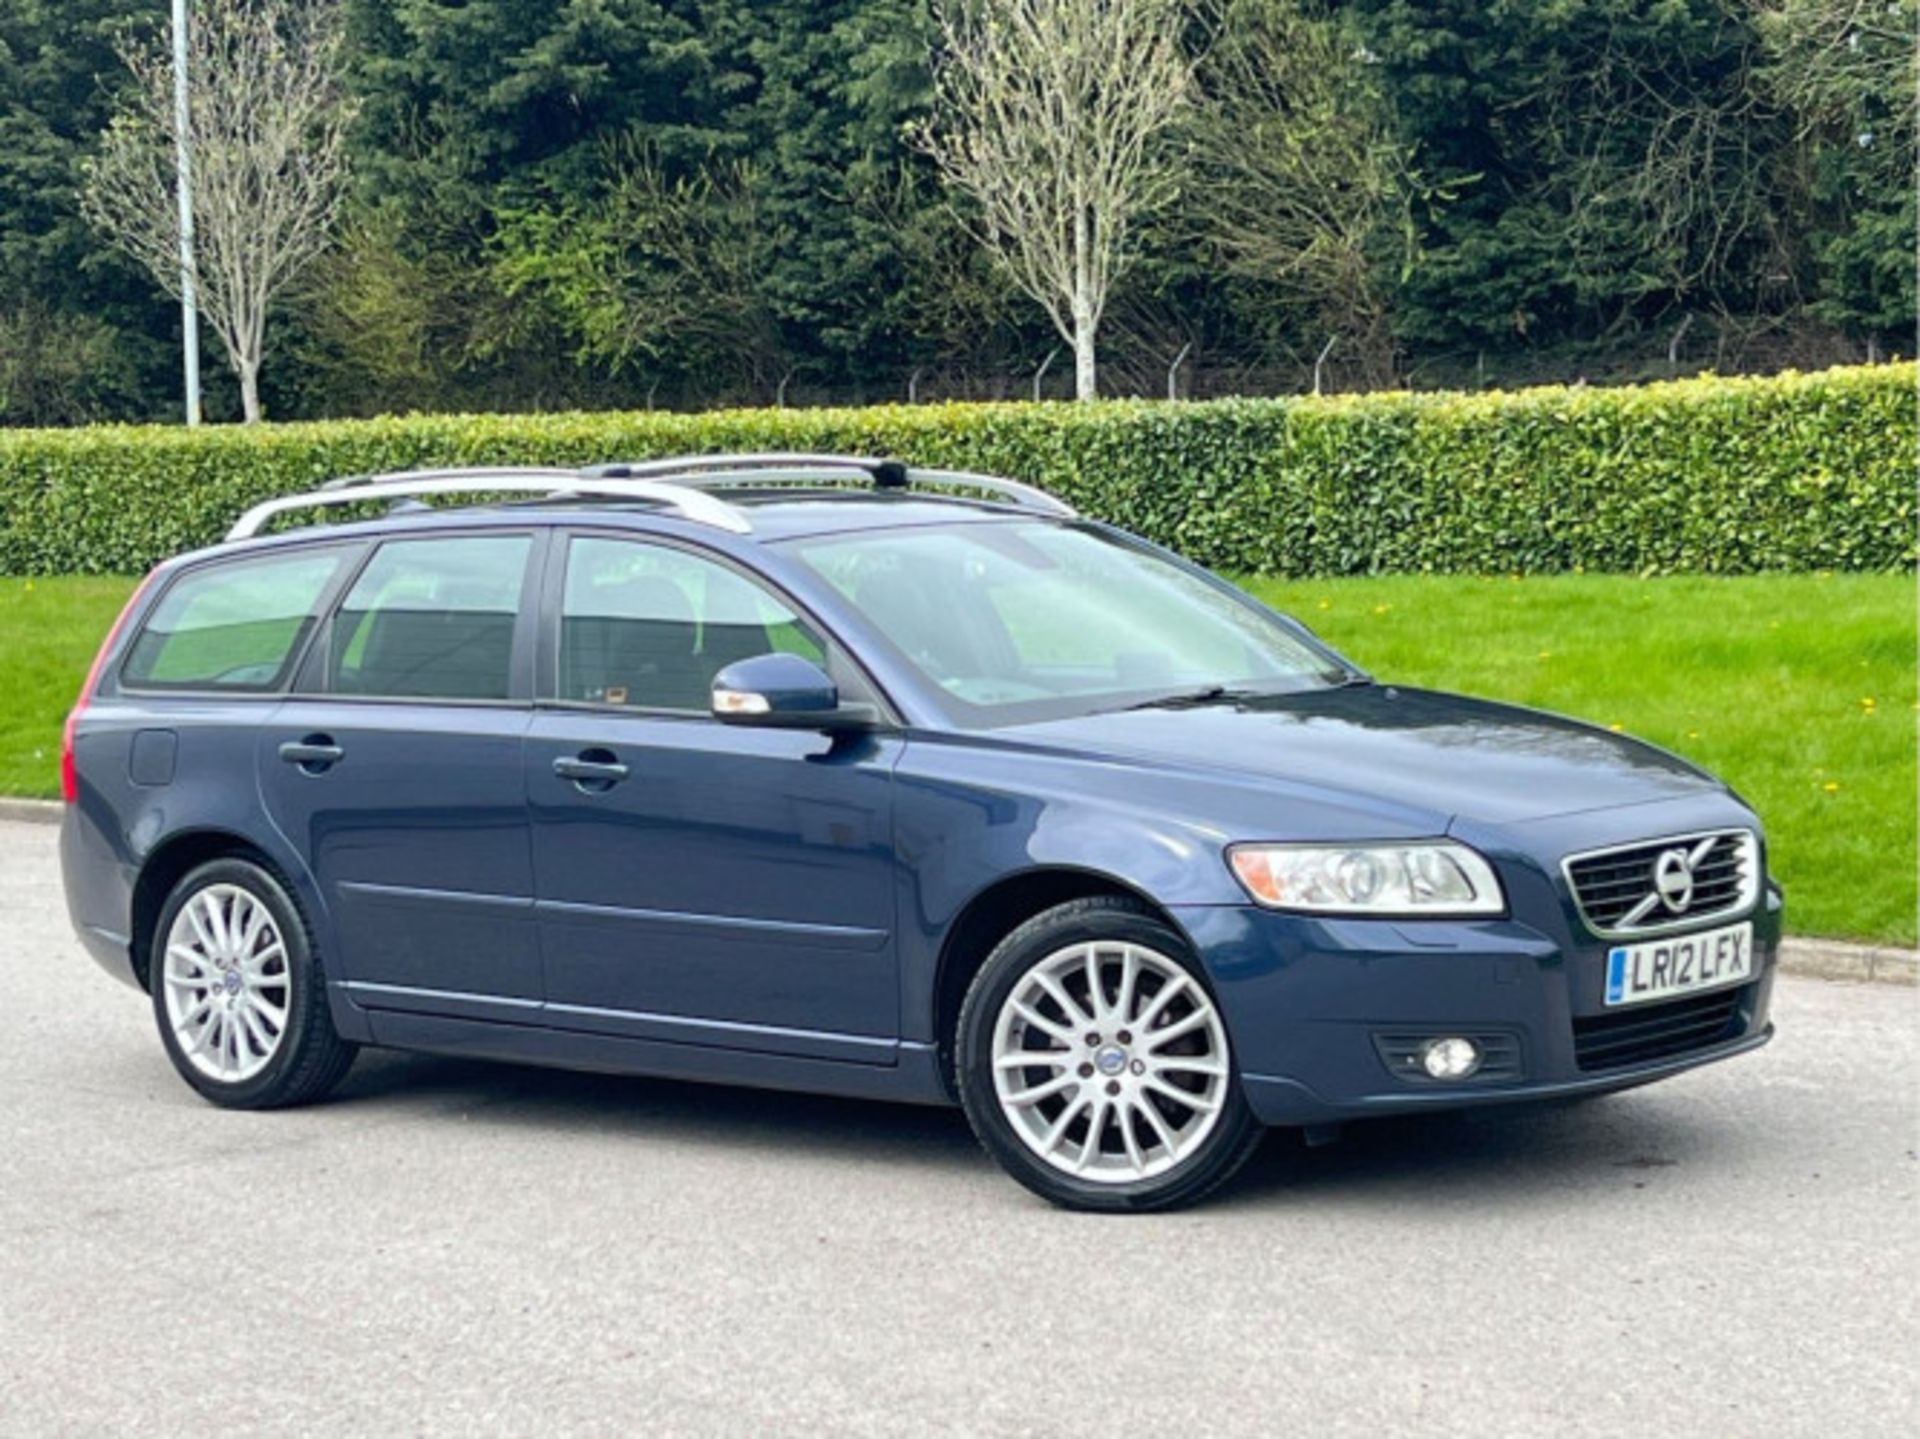 VOLVO V50 1.6D DRIVE SE LUX EDITION EURO 5 (S/S) 5DR (2012) - Image 3 of 88